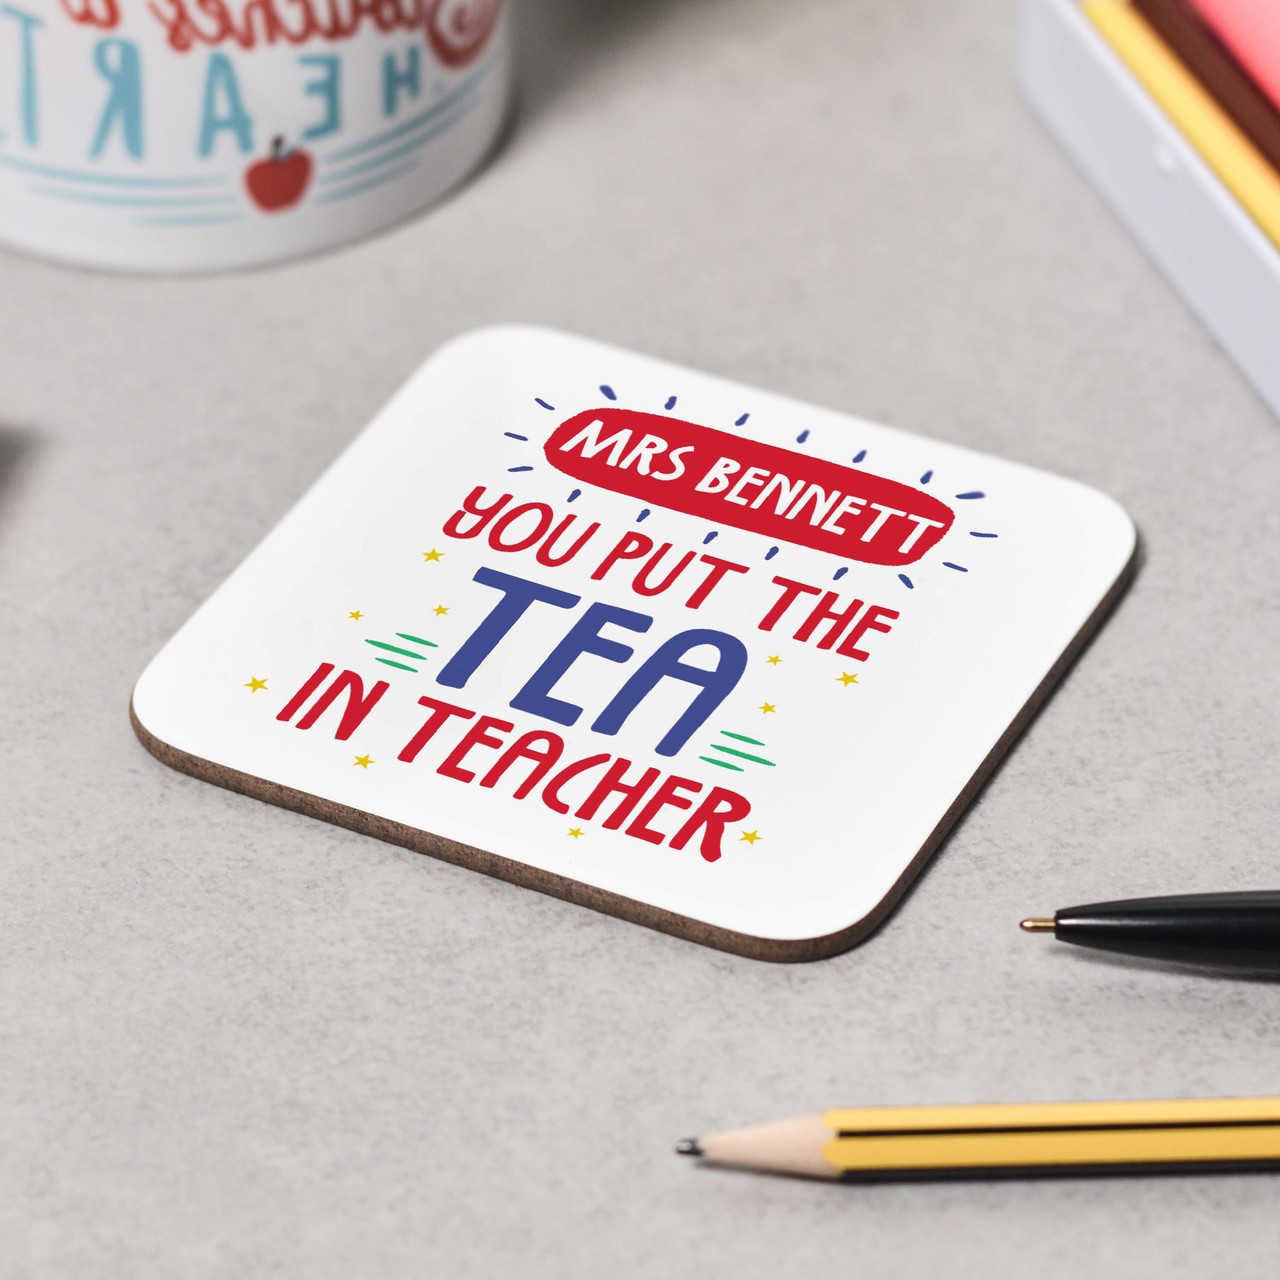 Personalised You put the Tea in teacher Coaster